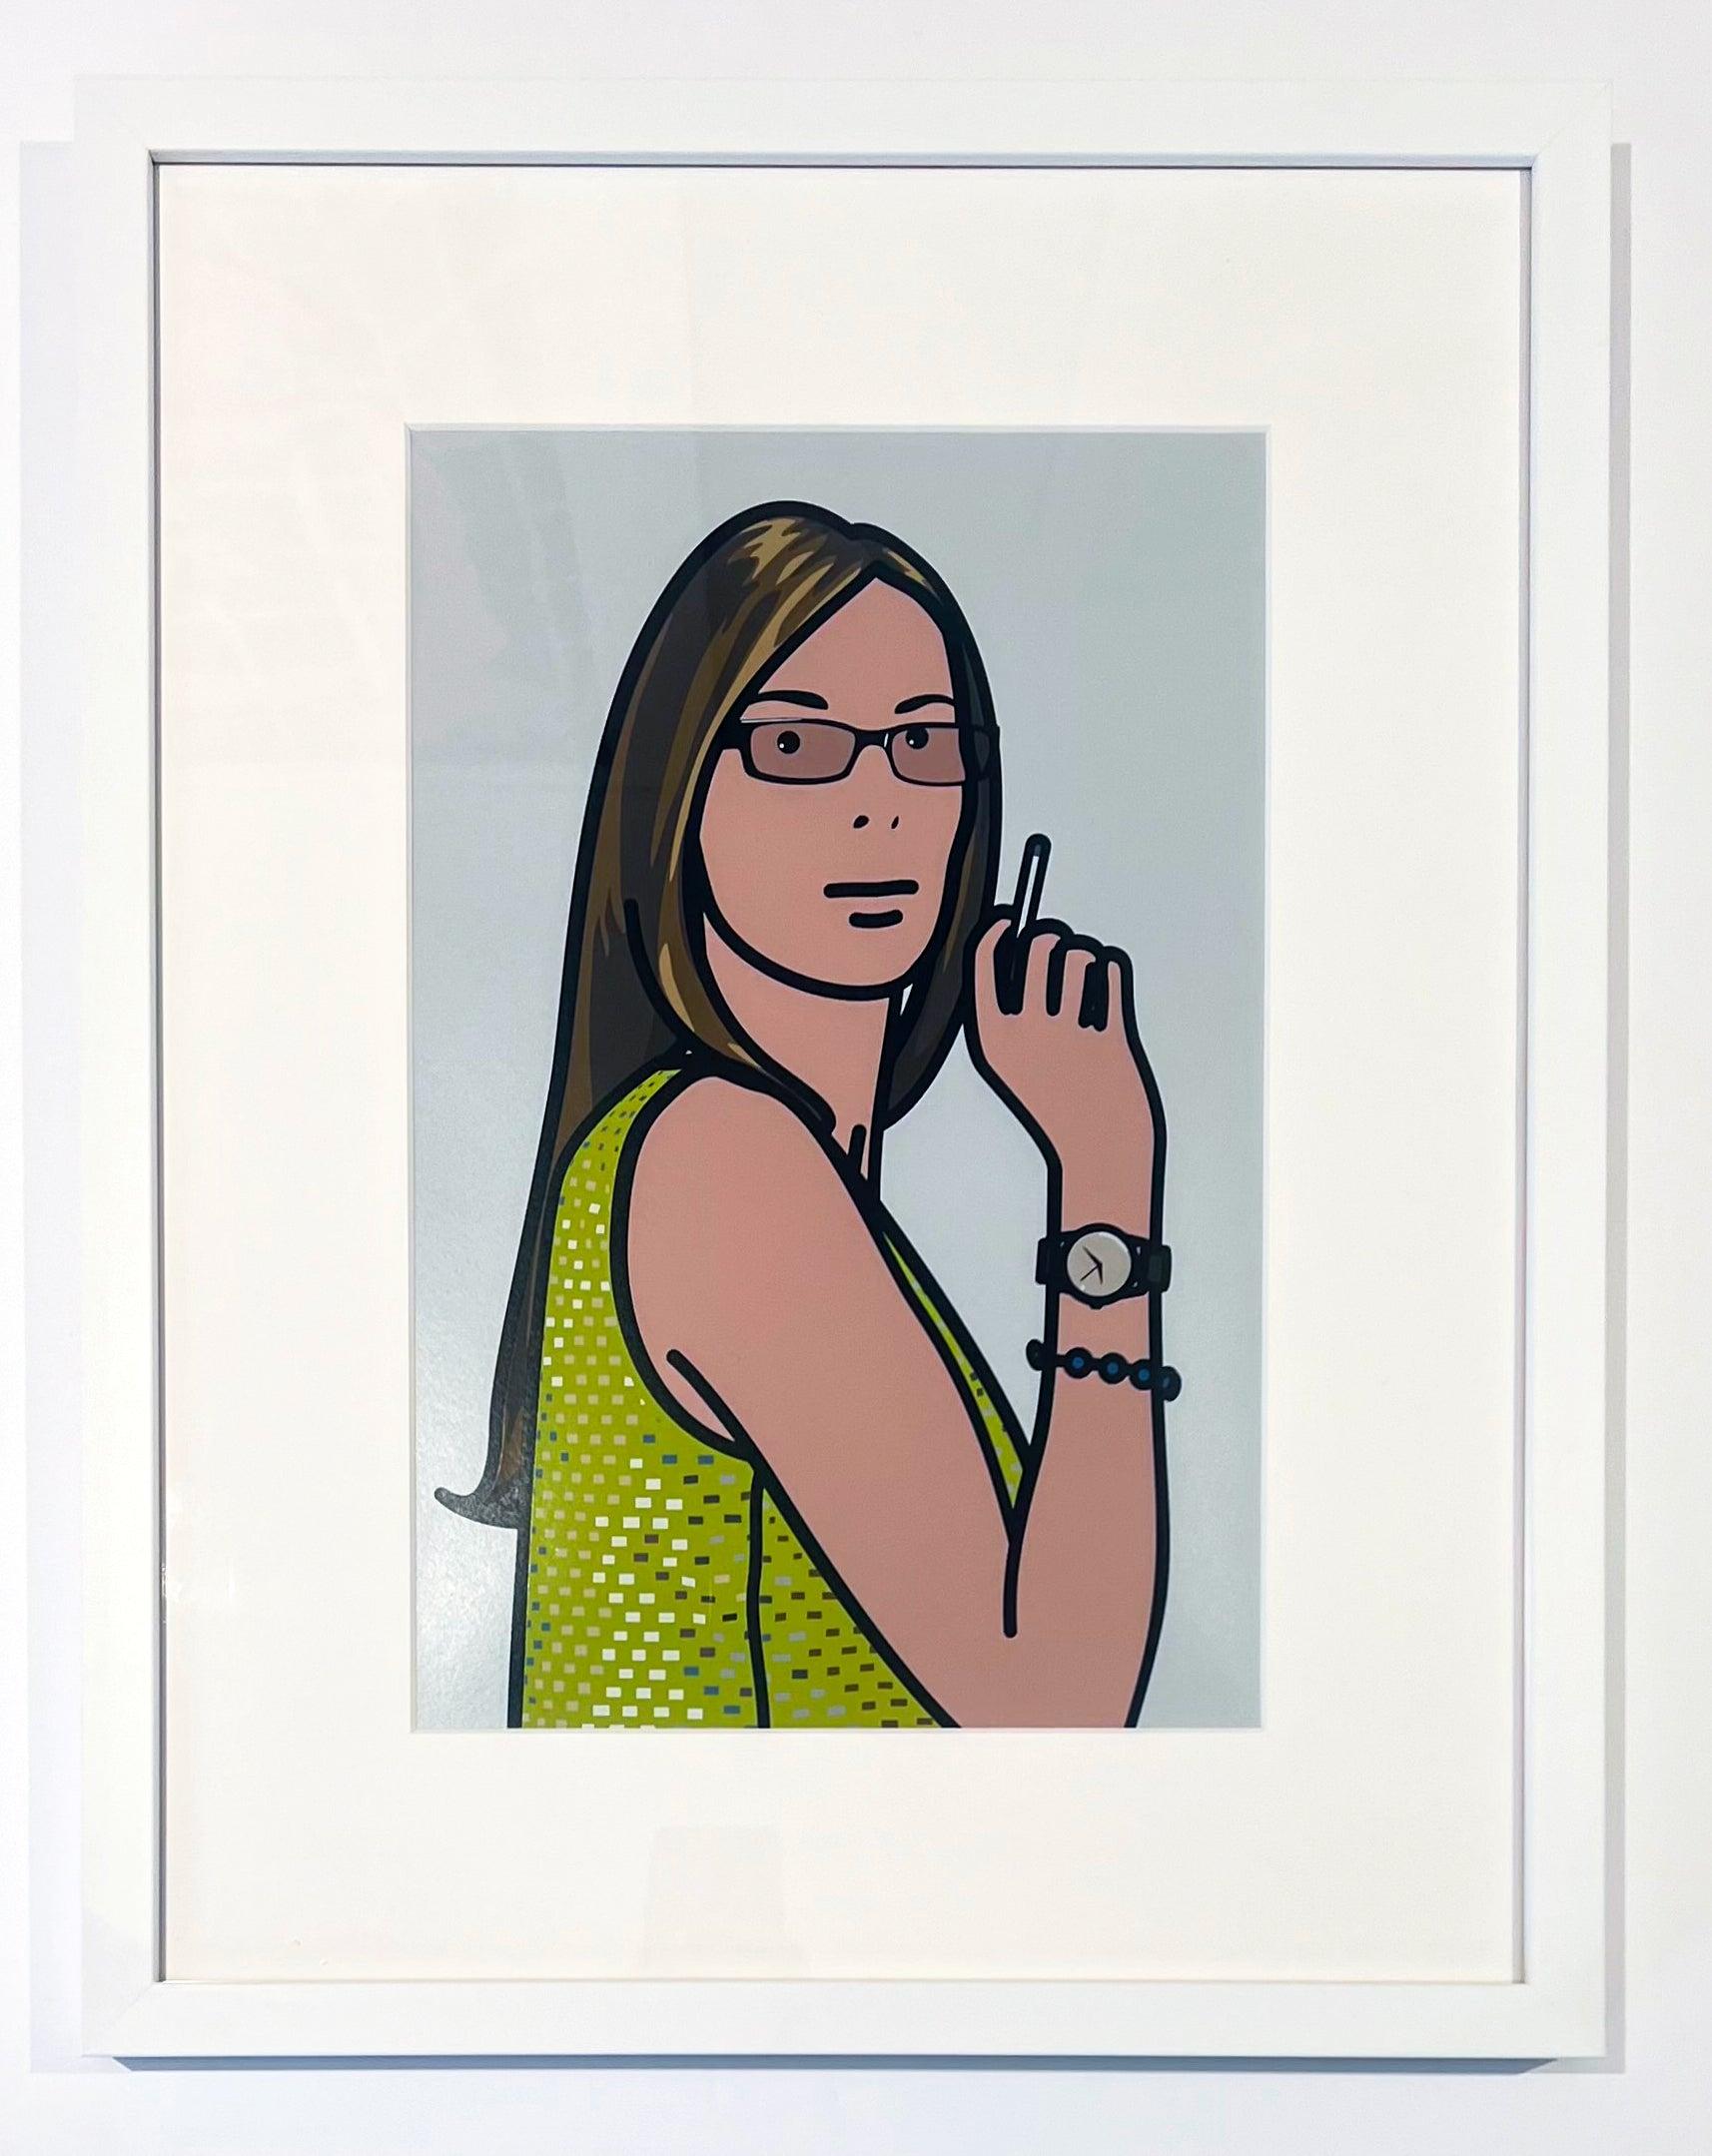 Ruth Smoking 2, from 26 Portraits - Print by Julian Opie